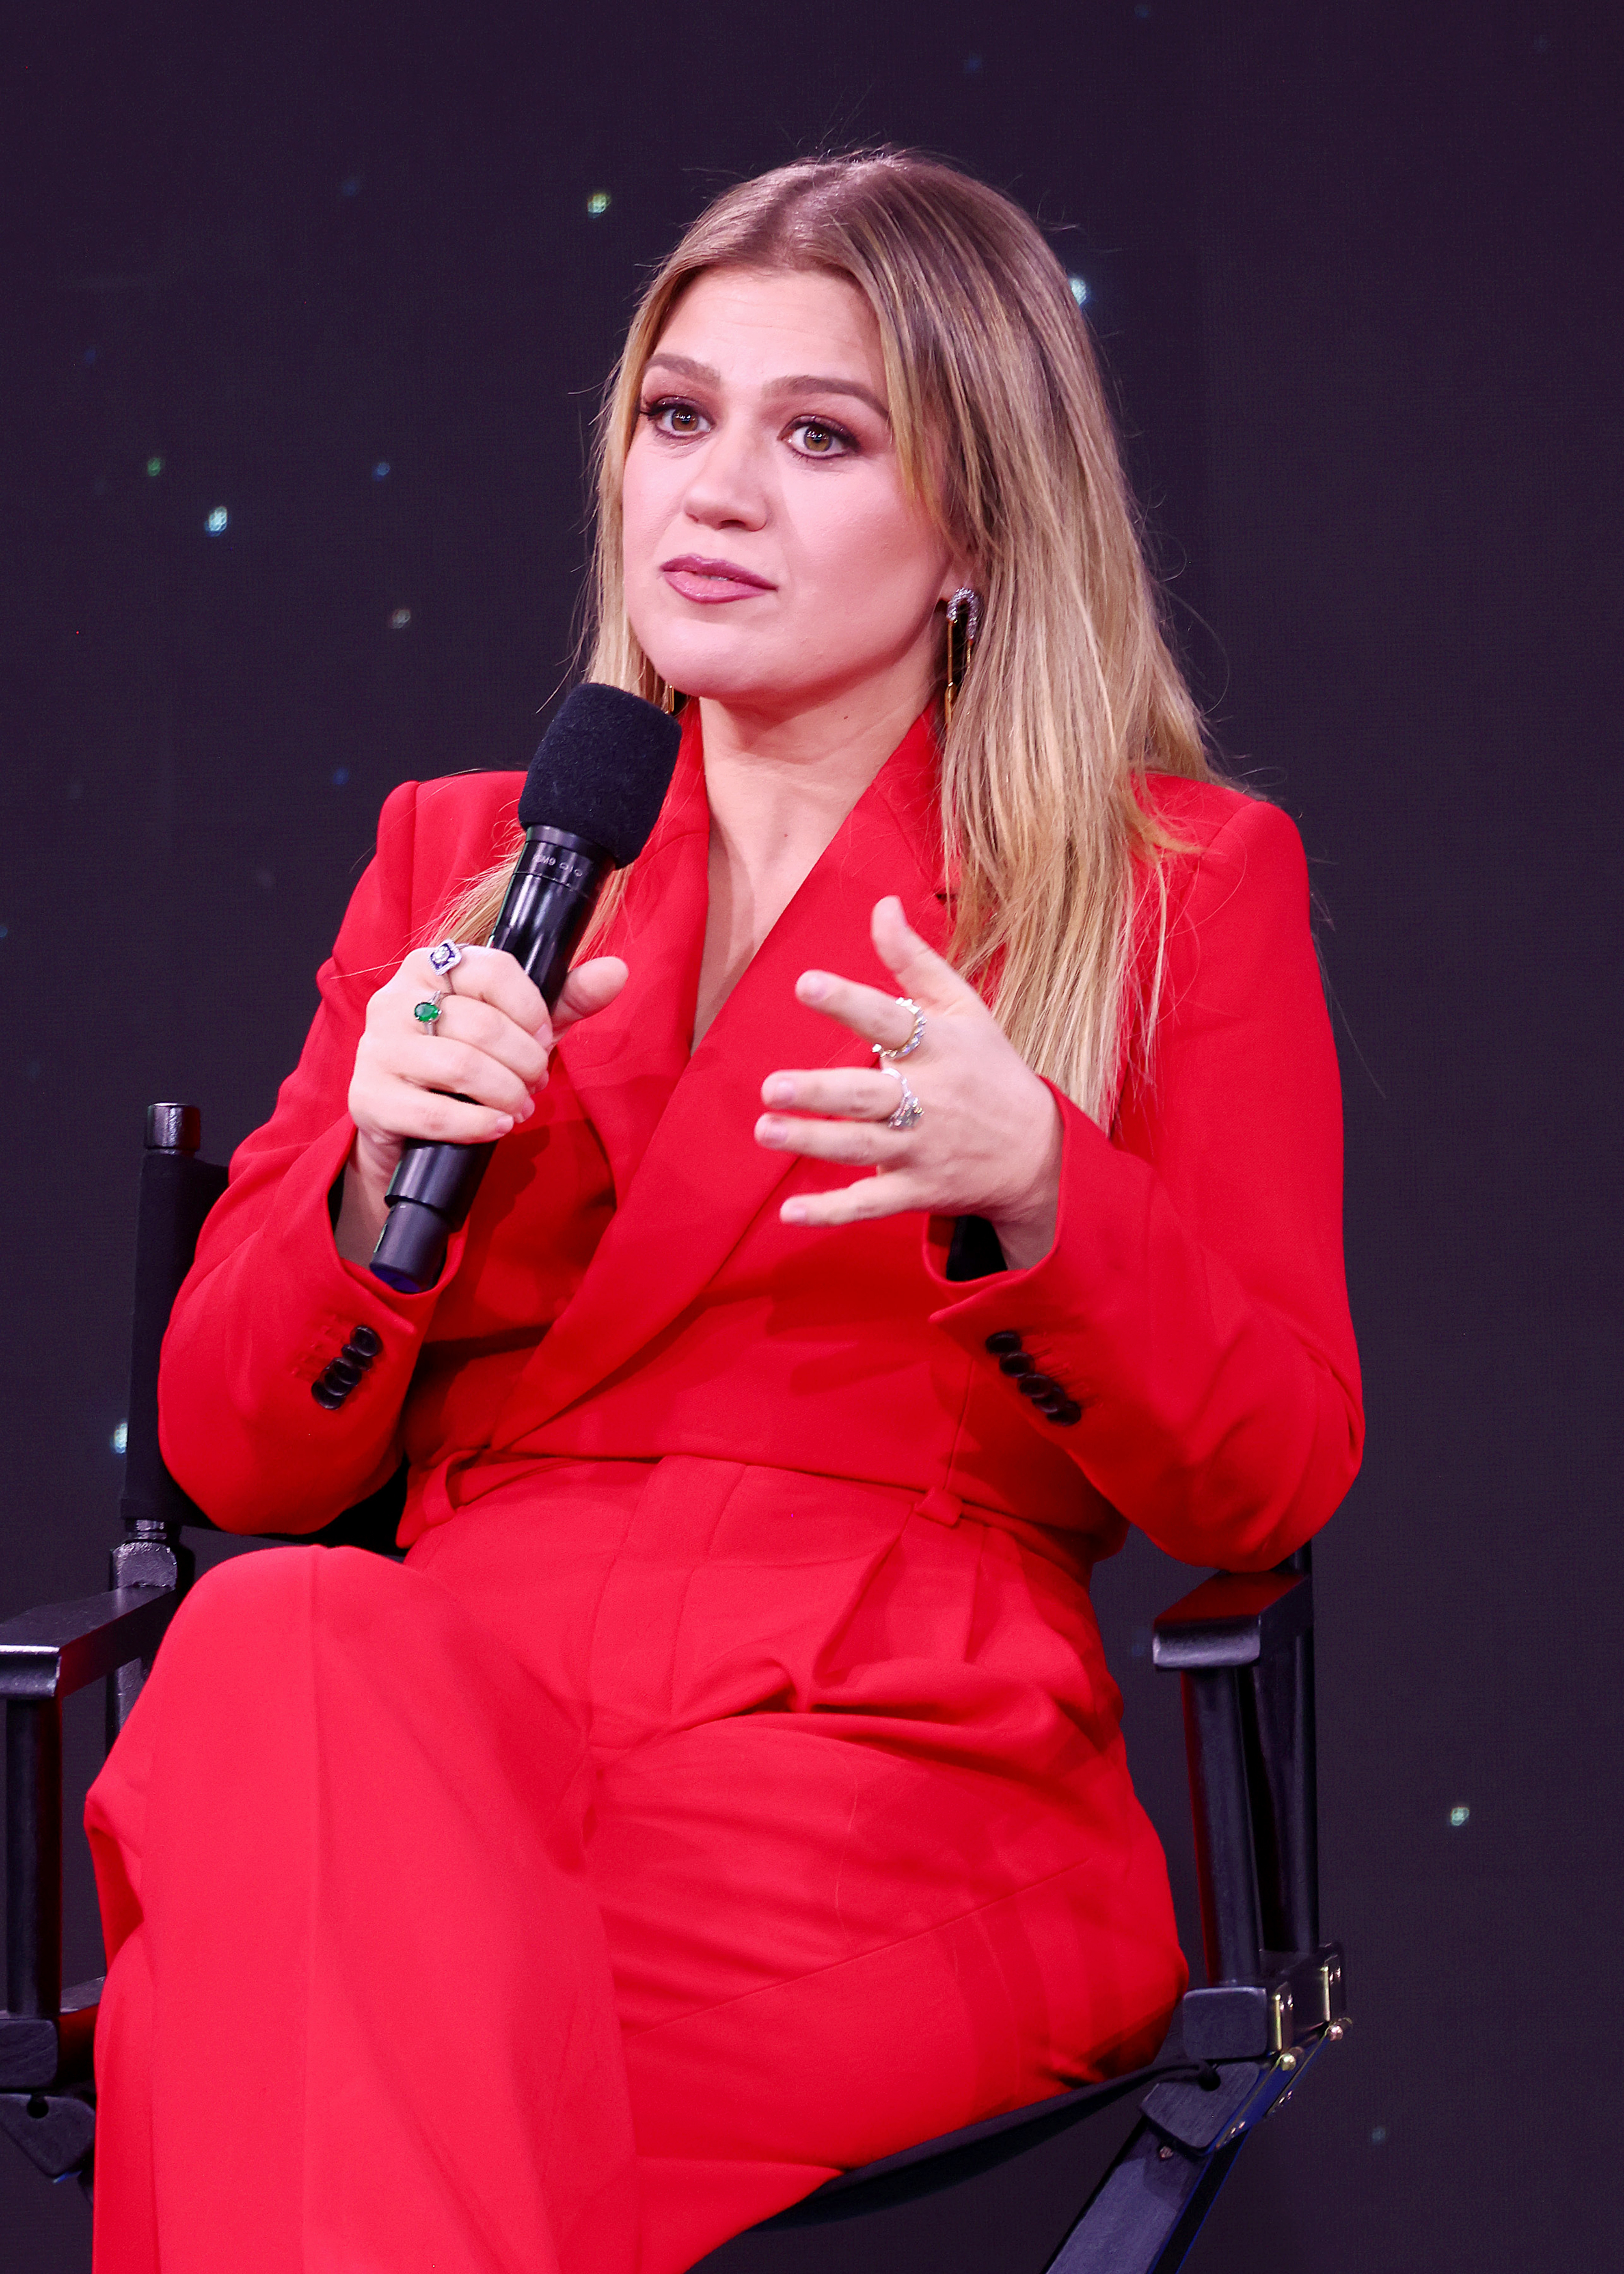 Kelly in a red suit speaking into a microphone during an event